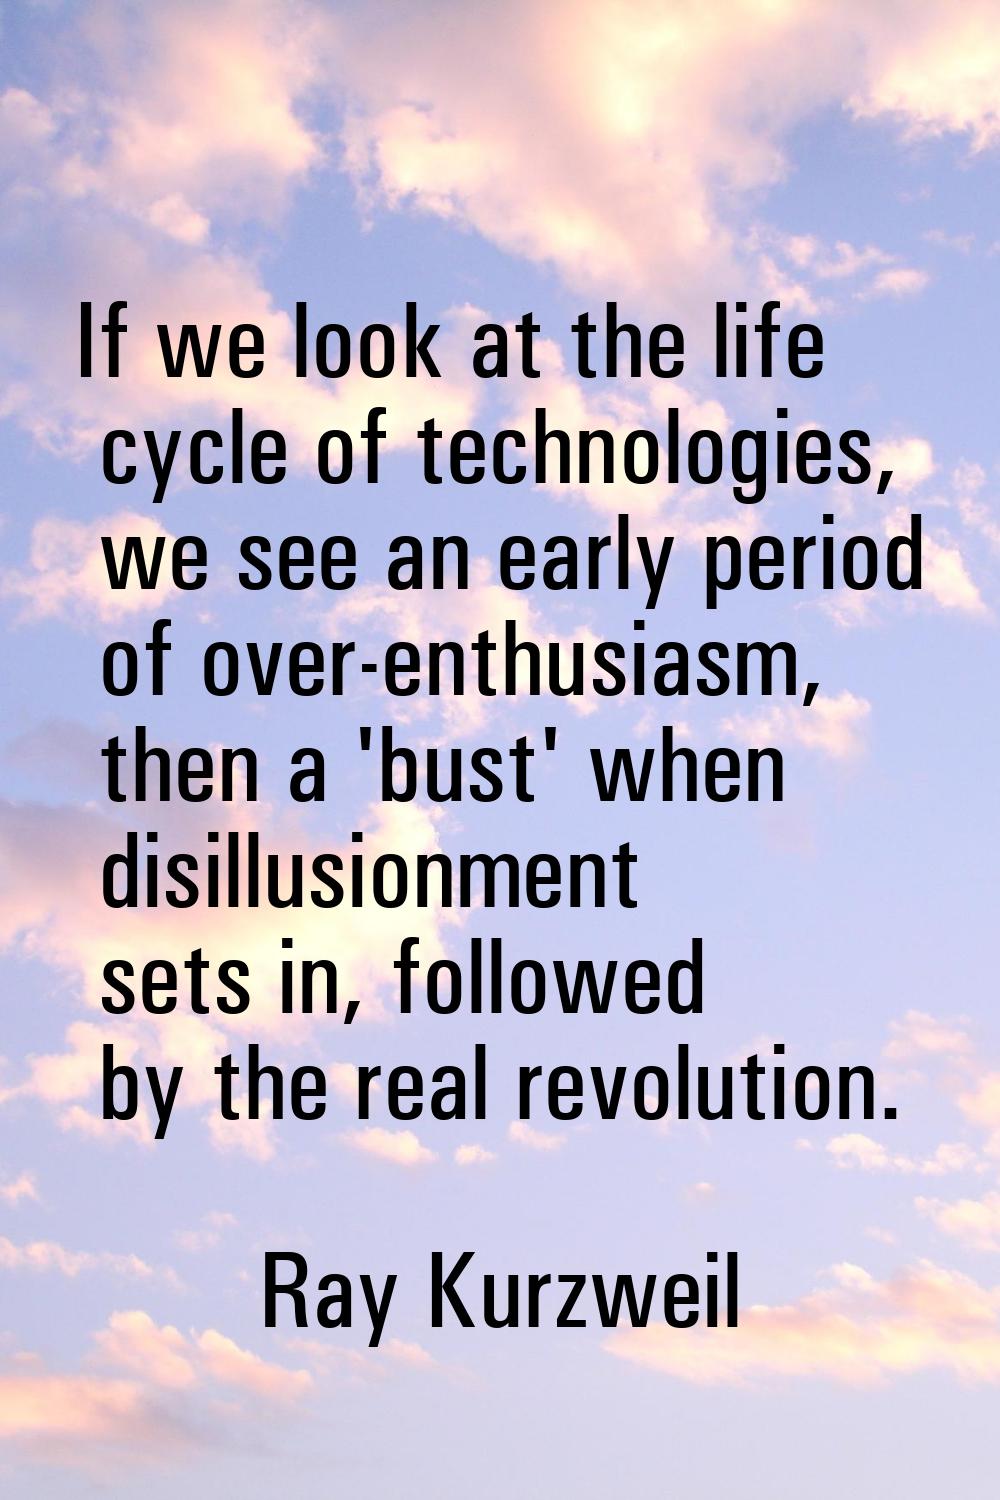 If we look at the life cycle of technologies, we see an early period of over-enthusiasm, then a 'bu